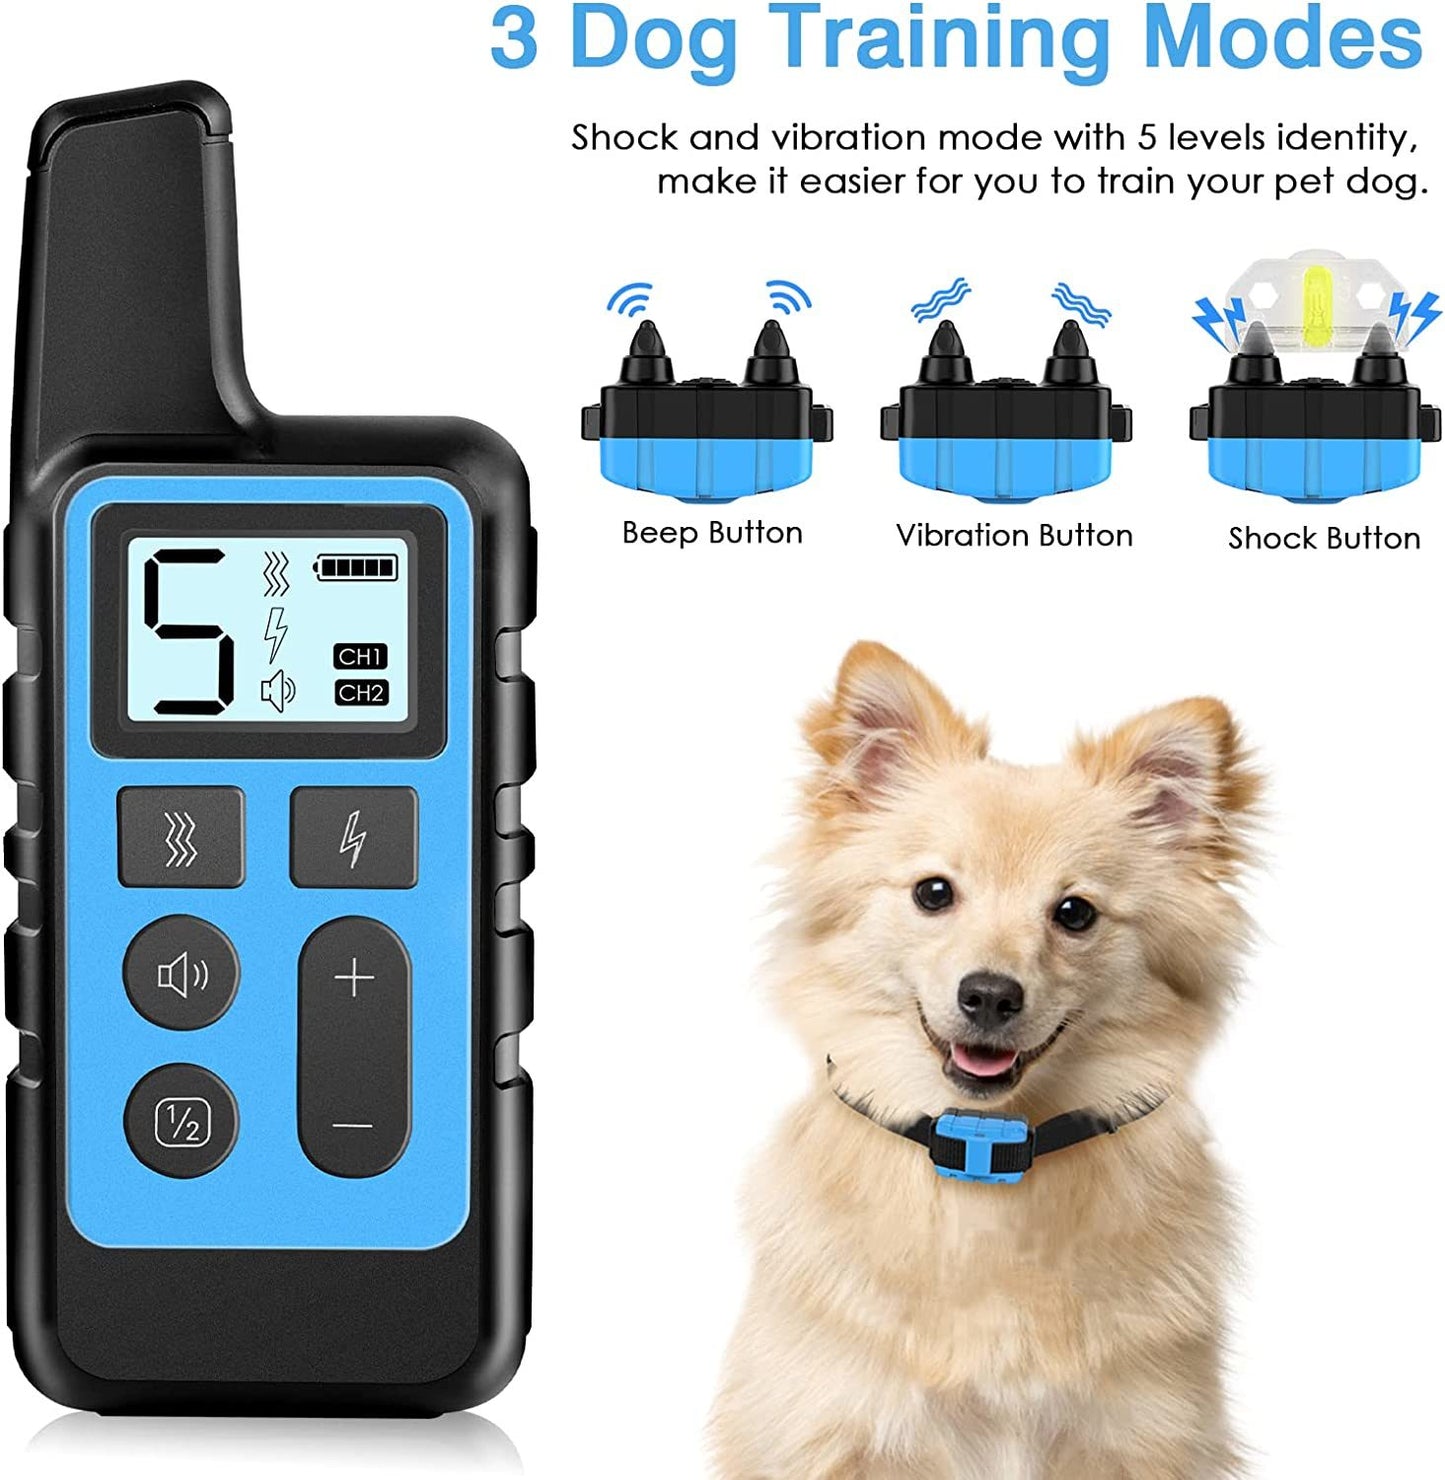 Dog Training Collar; Waterproof Shock Collars for Dog with Remote Range 1640 ft; 3 Training Modes; Beep; Vibration and Shock; Rechargeable Electric Dog Collar for Small Medium Large Dogs